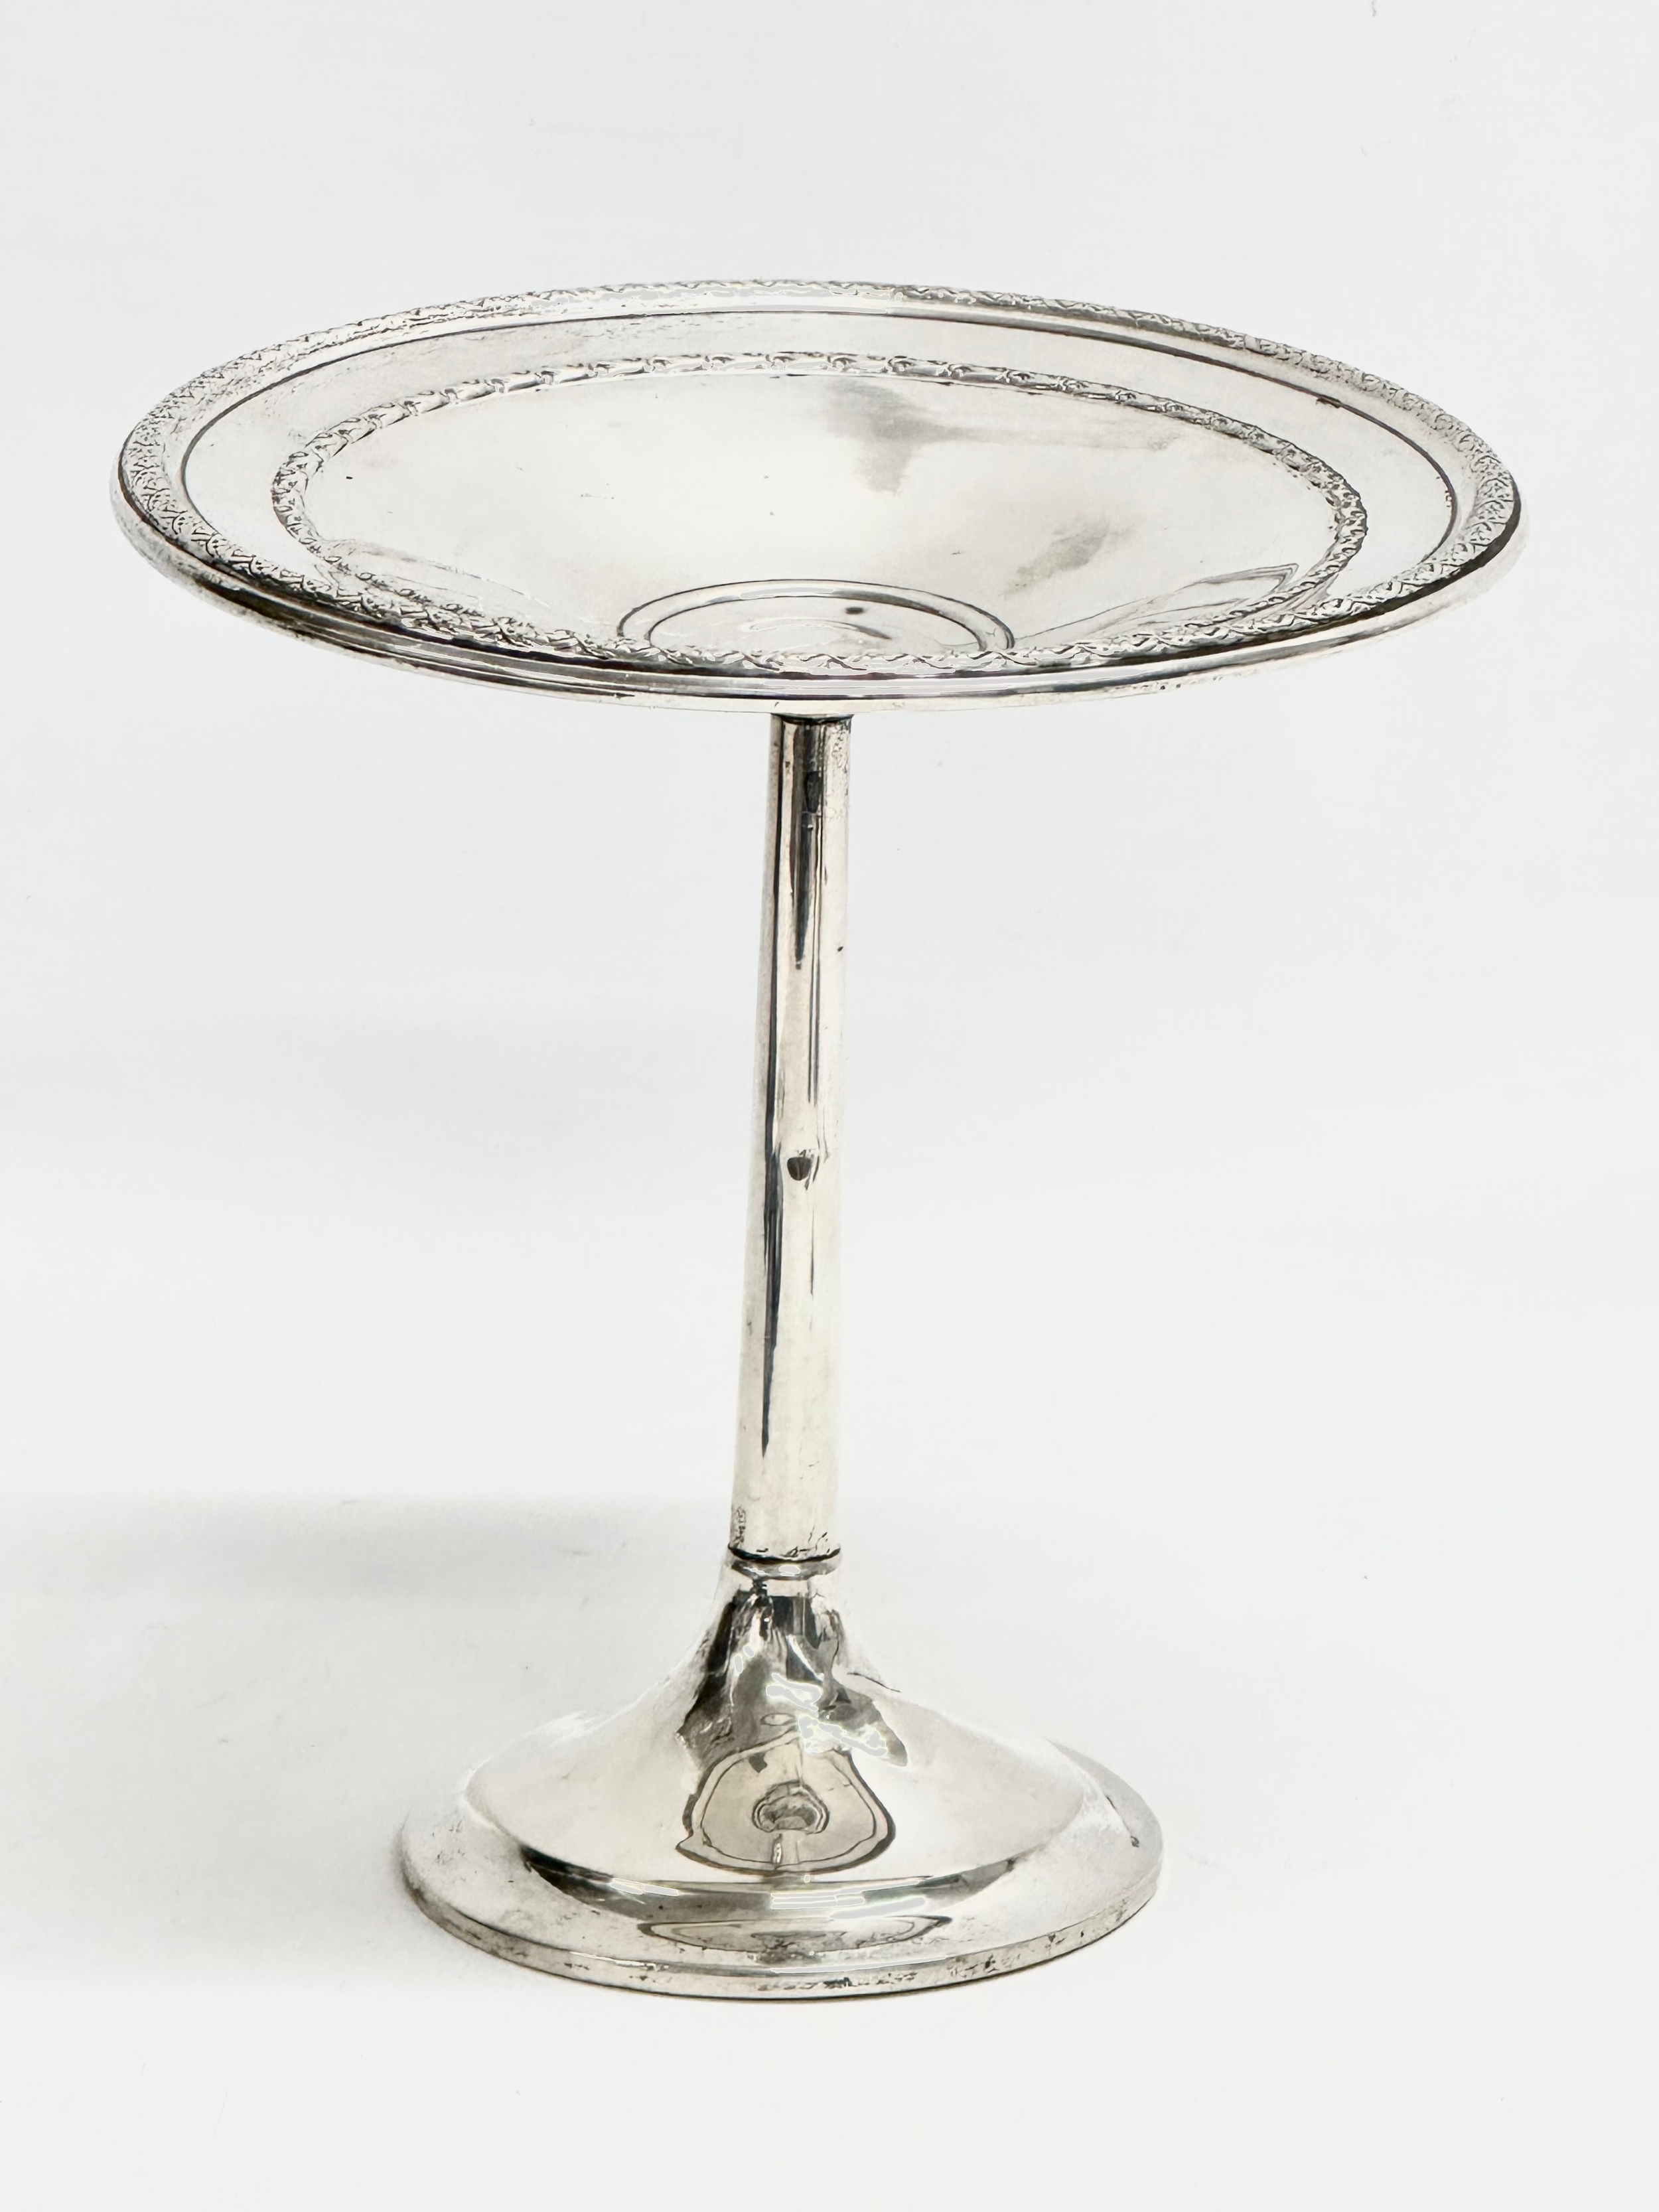 A late 19th/early 20th century sterling silver tazza by Alvin. 15.5x16cm. 128.81 grams.